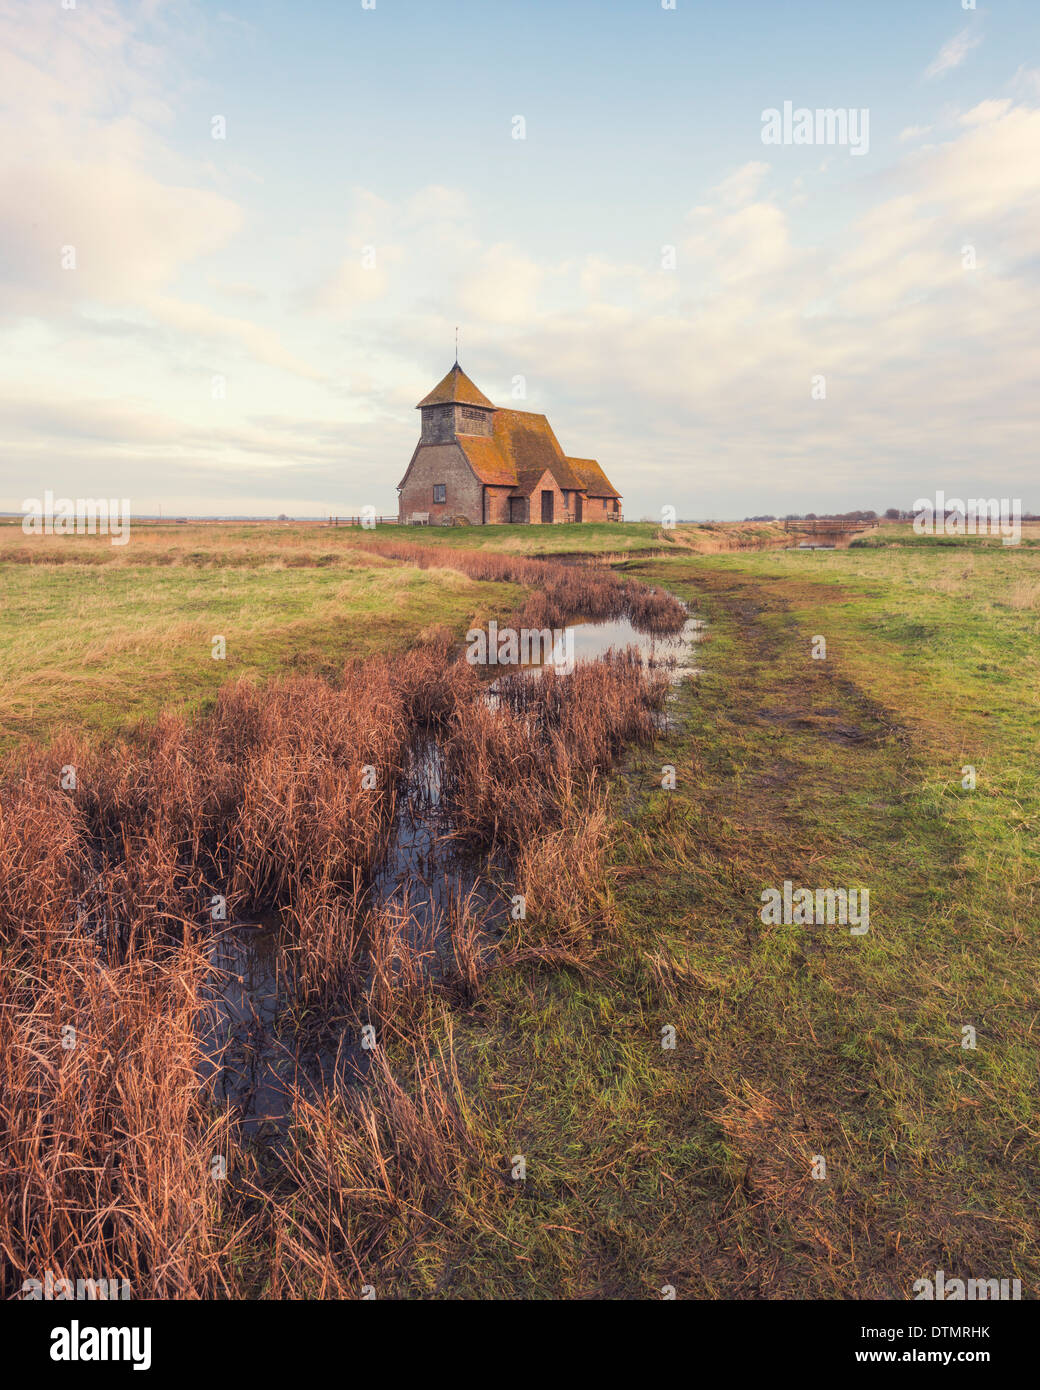 Church of St Thomas a Becket or Fairfield Church, located out on the Romney Marsh in Kent, England Stock Photo